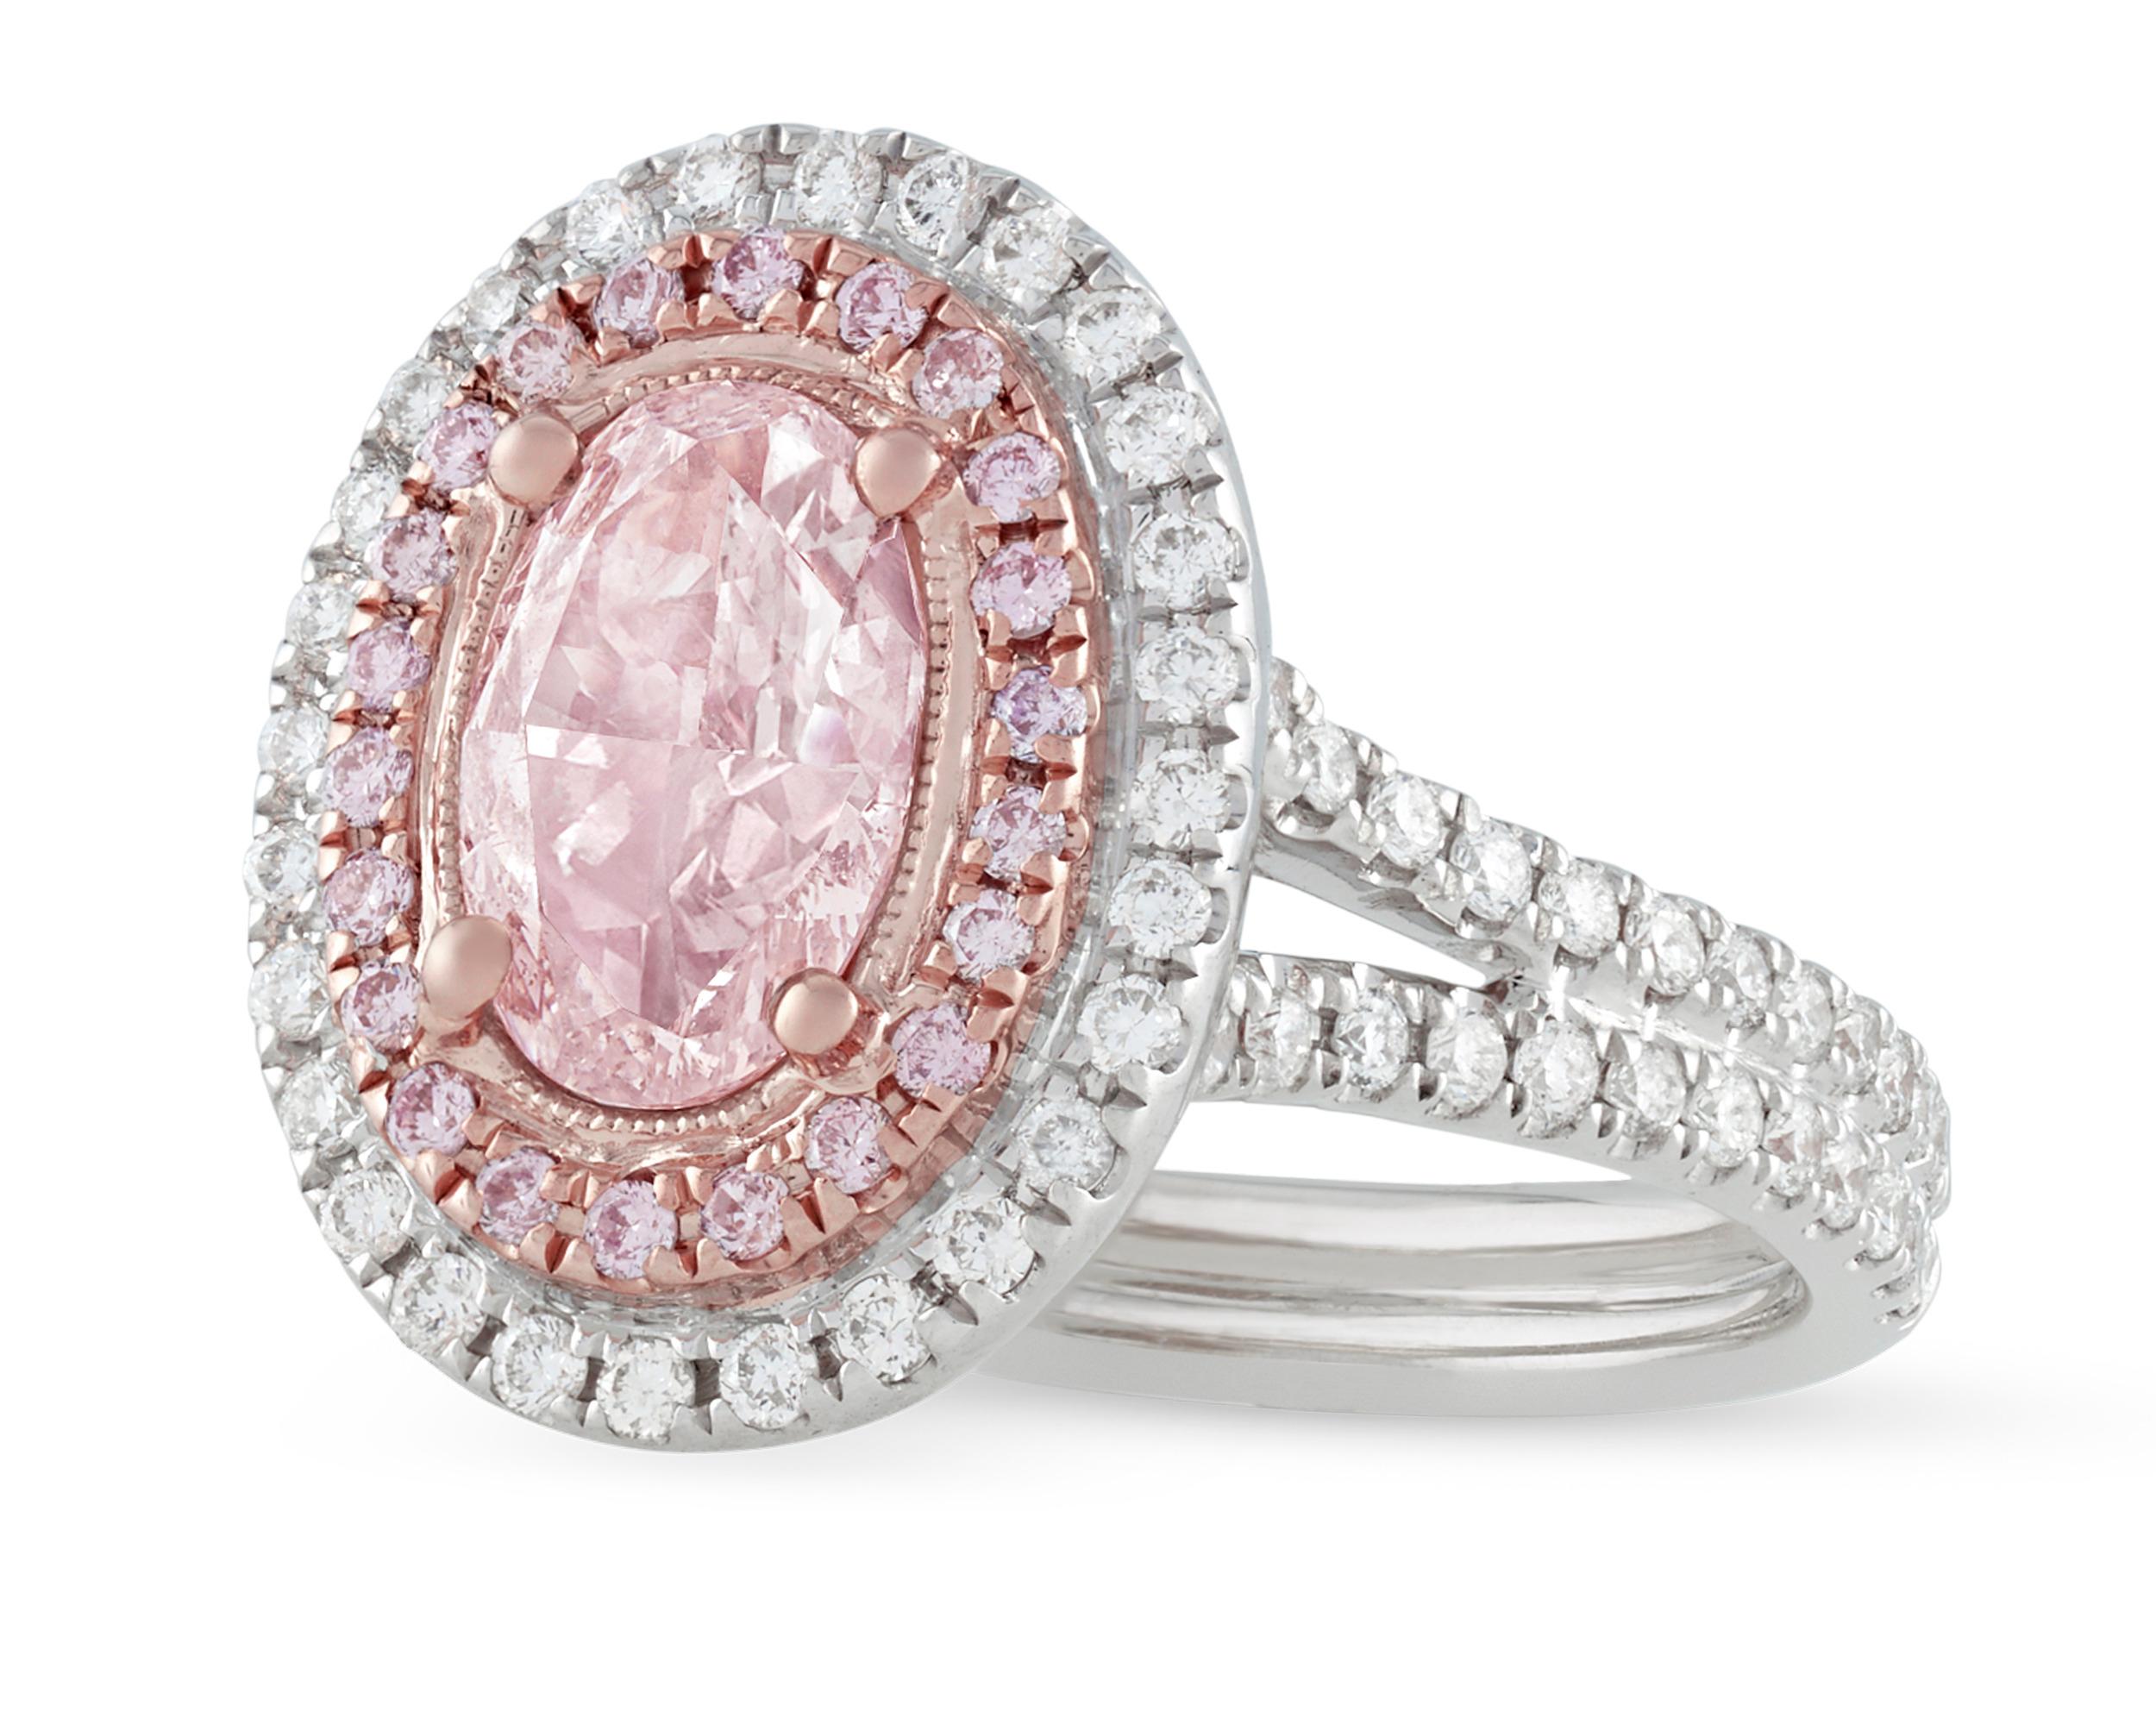 Displaying a delicate, even coloration is the beautiful natural fancy light pink diamond in this ring. Certified by the Gemological Institute of America to be natural fancy light brown-pink, this fabulous 1.30-carat diamond is surrounded by a halo